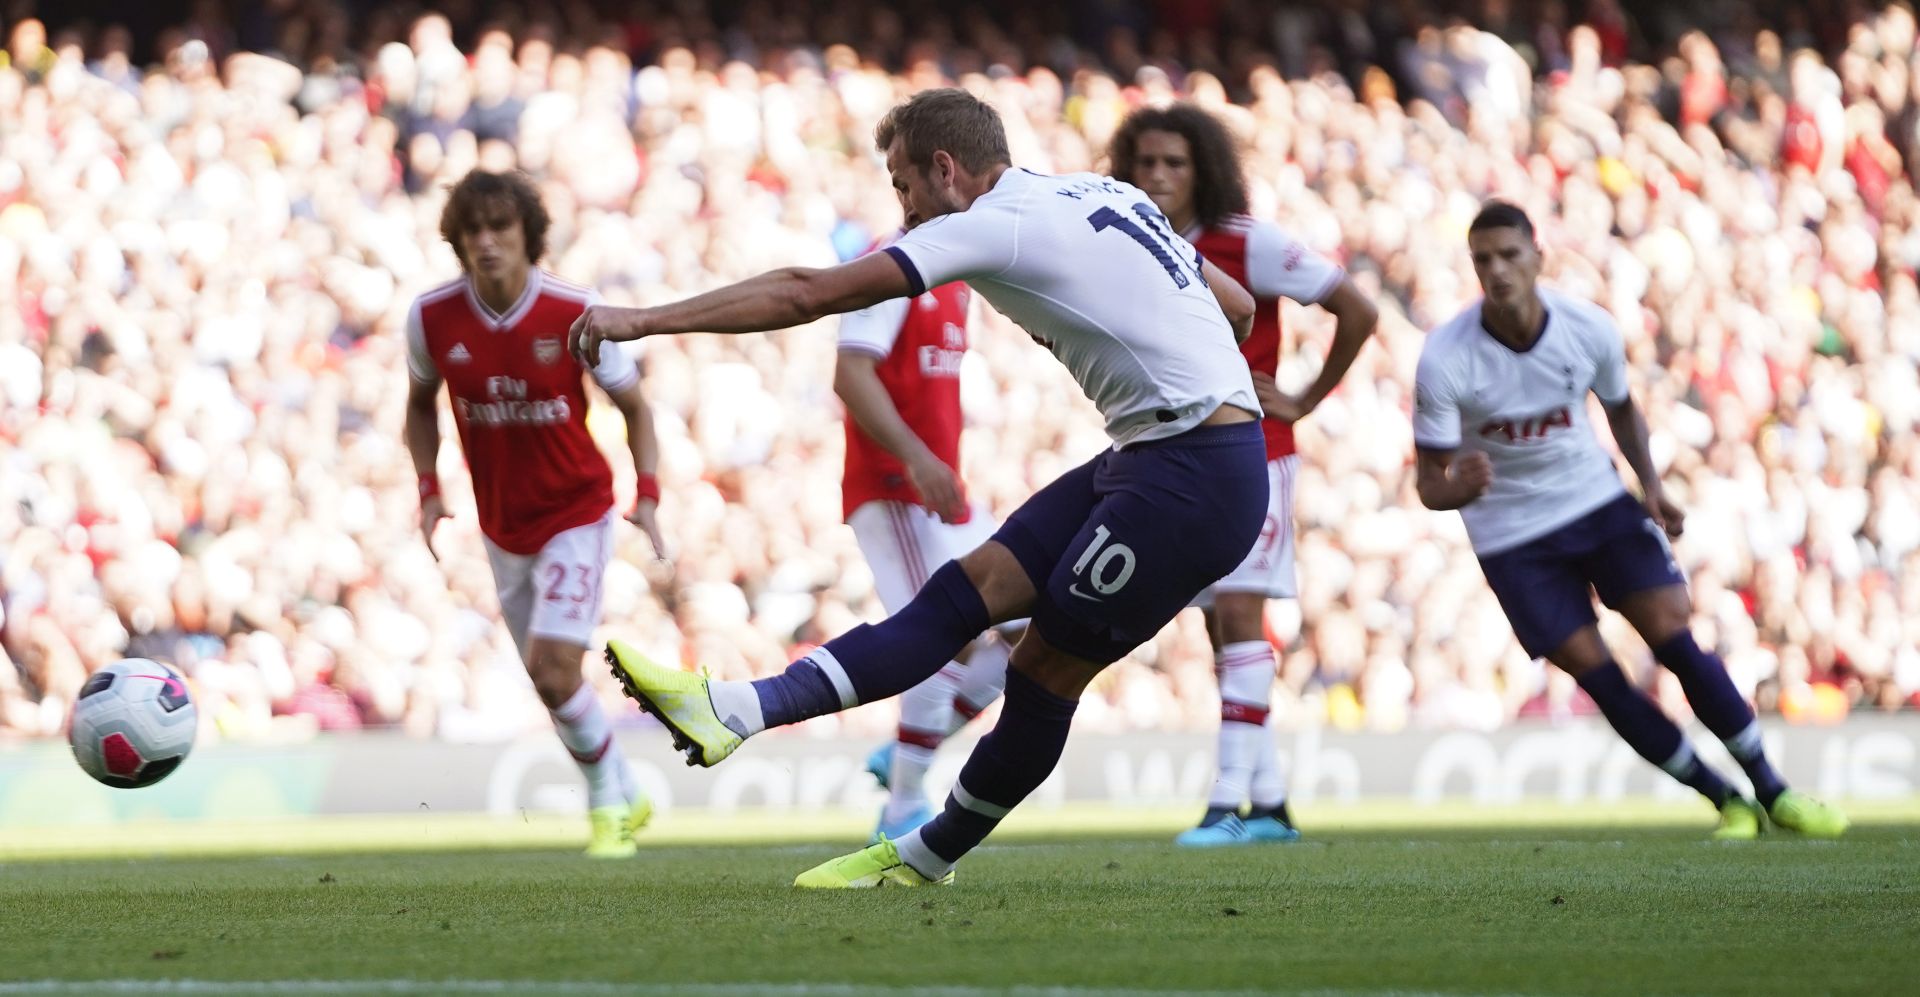 epa07810710 Tottenham's Harry Kane (C) scores the 2-0 lead from the penalty spot during the English Premier League soccer match between Arsenal FC and Tottenham Hotspur in London, Britain, 01 September 2019.  EPA/WILL OLIVER EDITORIAL USE ONLY. No use with unauthorized audio, video, data, fixture lists, club/league logos or 'live' services. Online in-match use limited to 120 images, no video emulation. No use in betting, games or single club/league/player publications